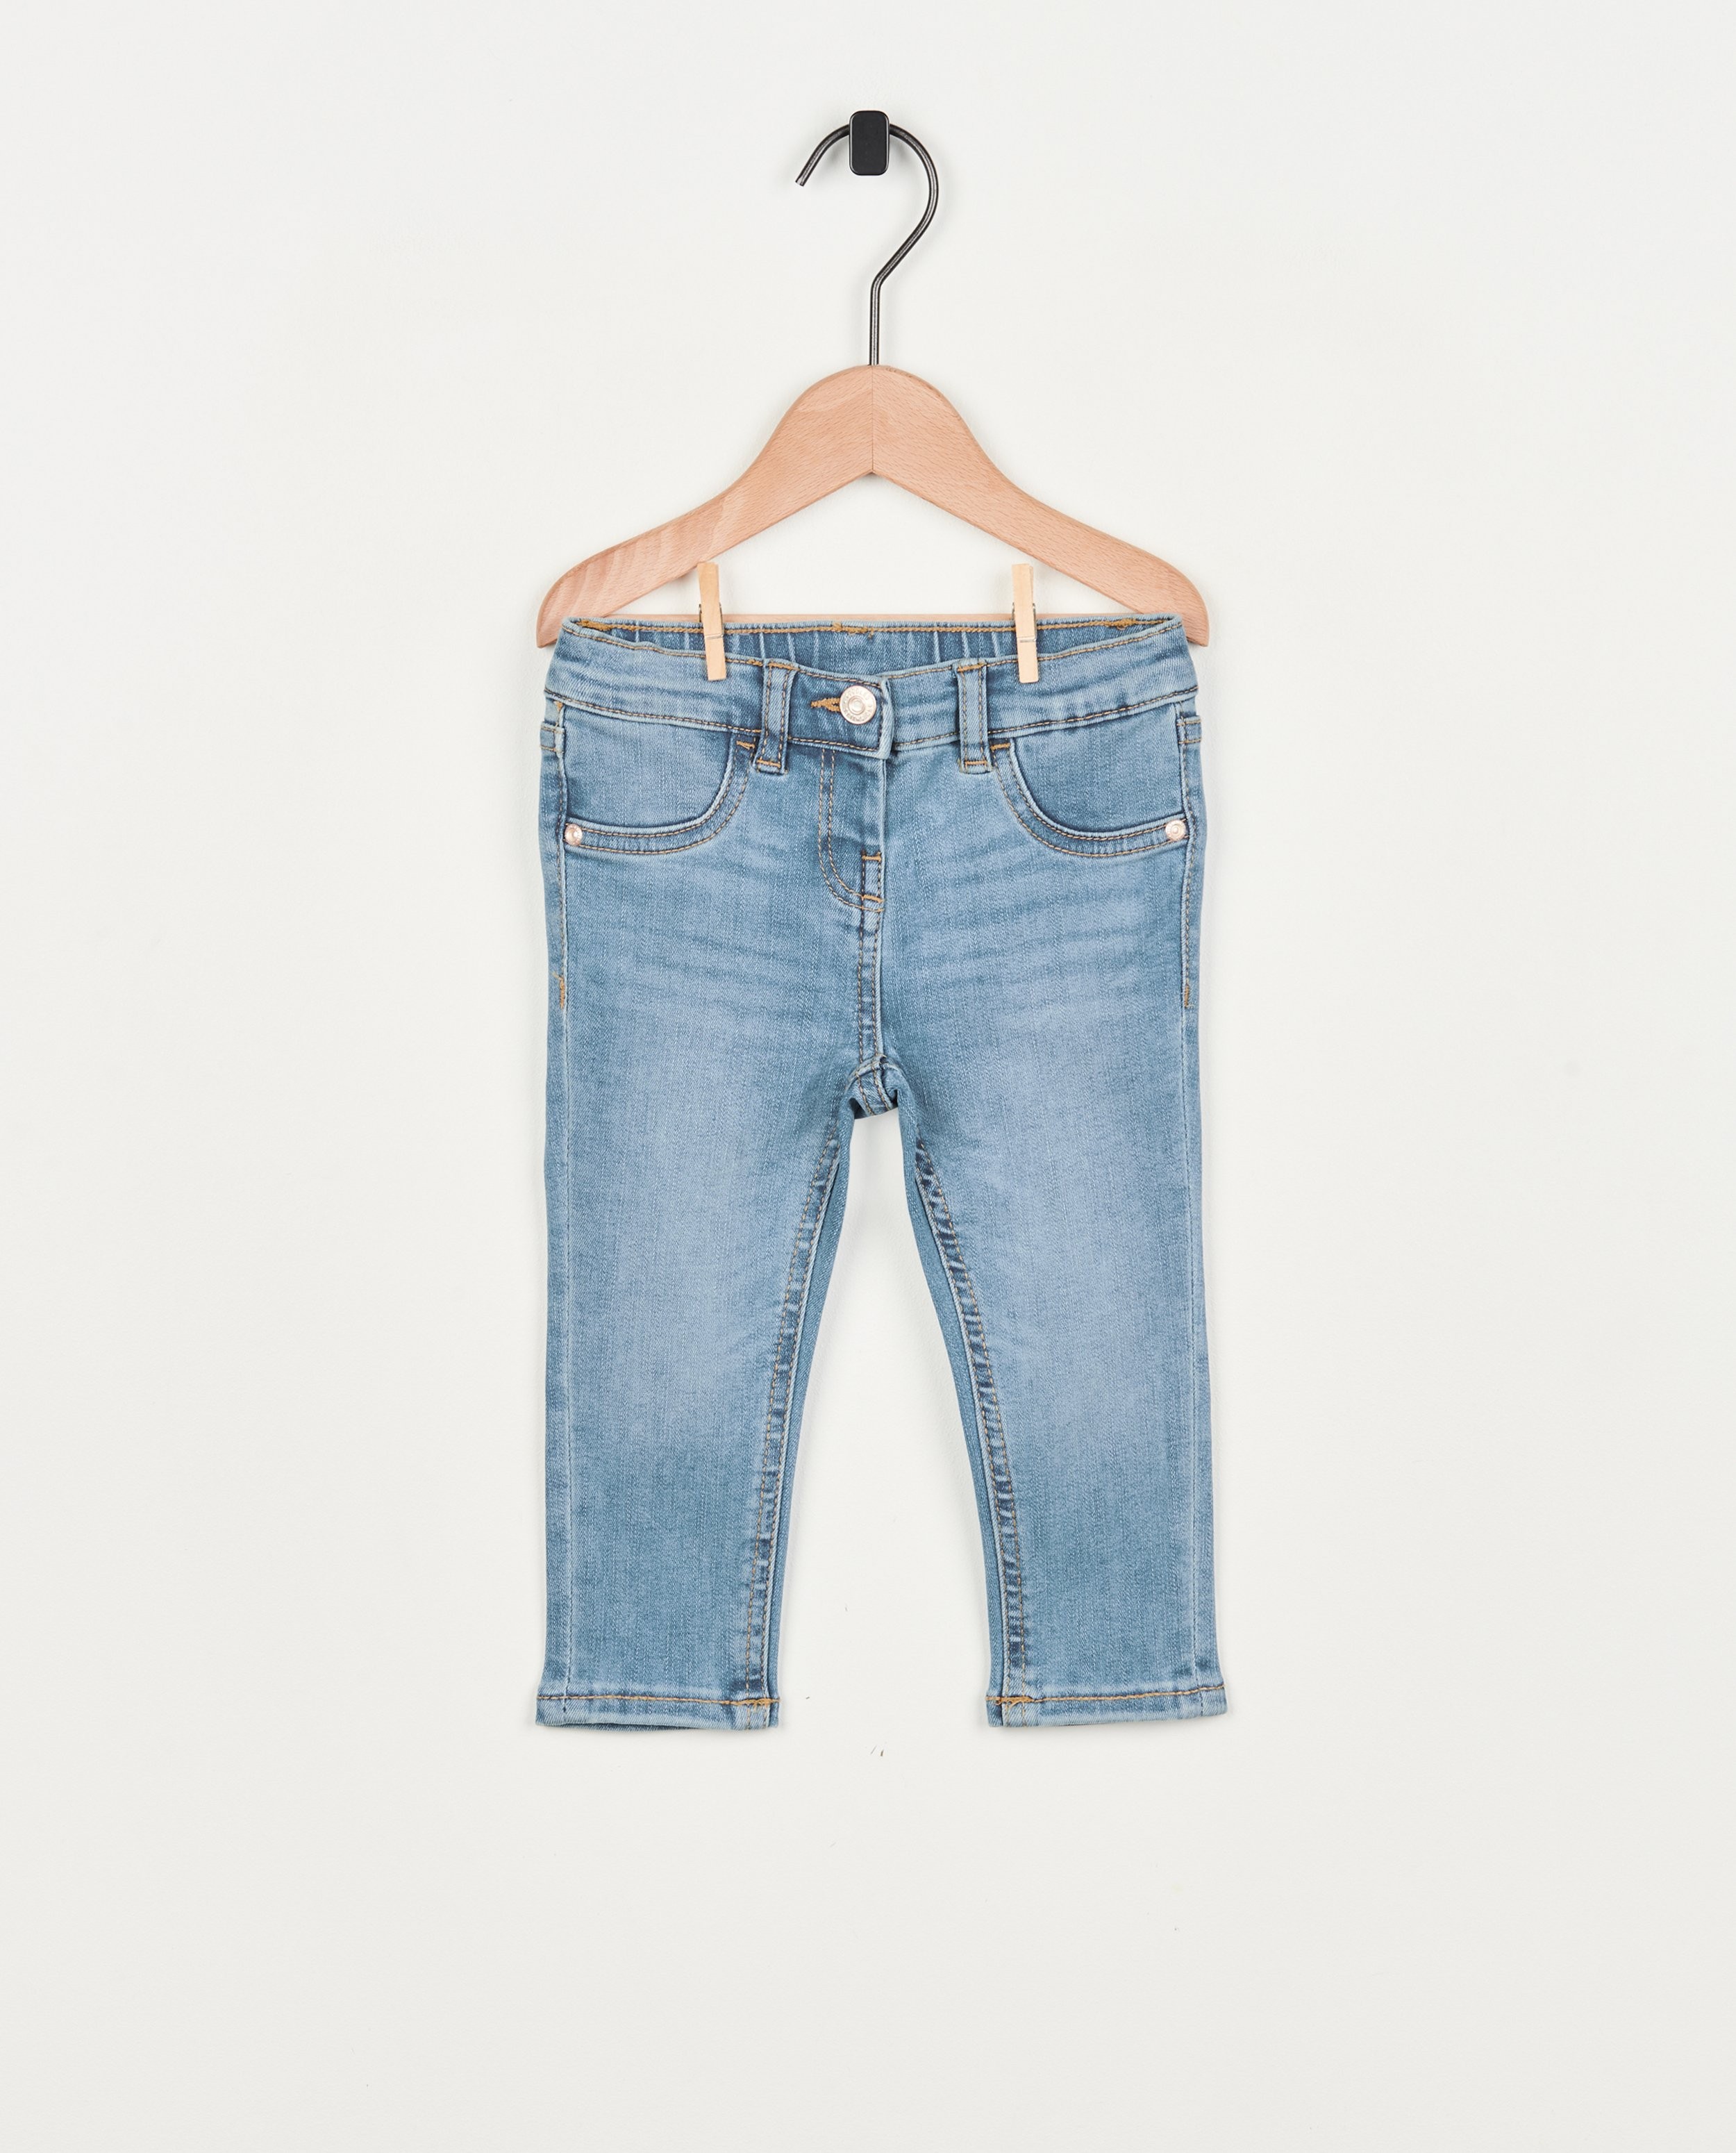 Lichtblauwe jeans, skinny fit - null - Cuddles and Smiles